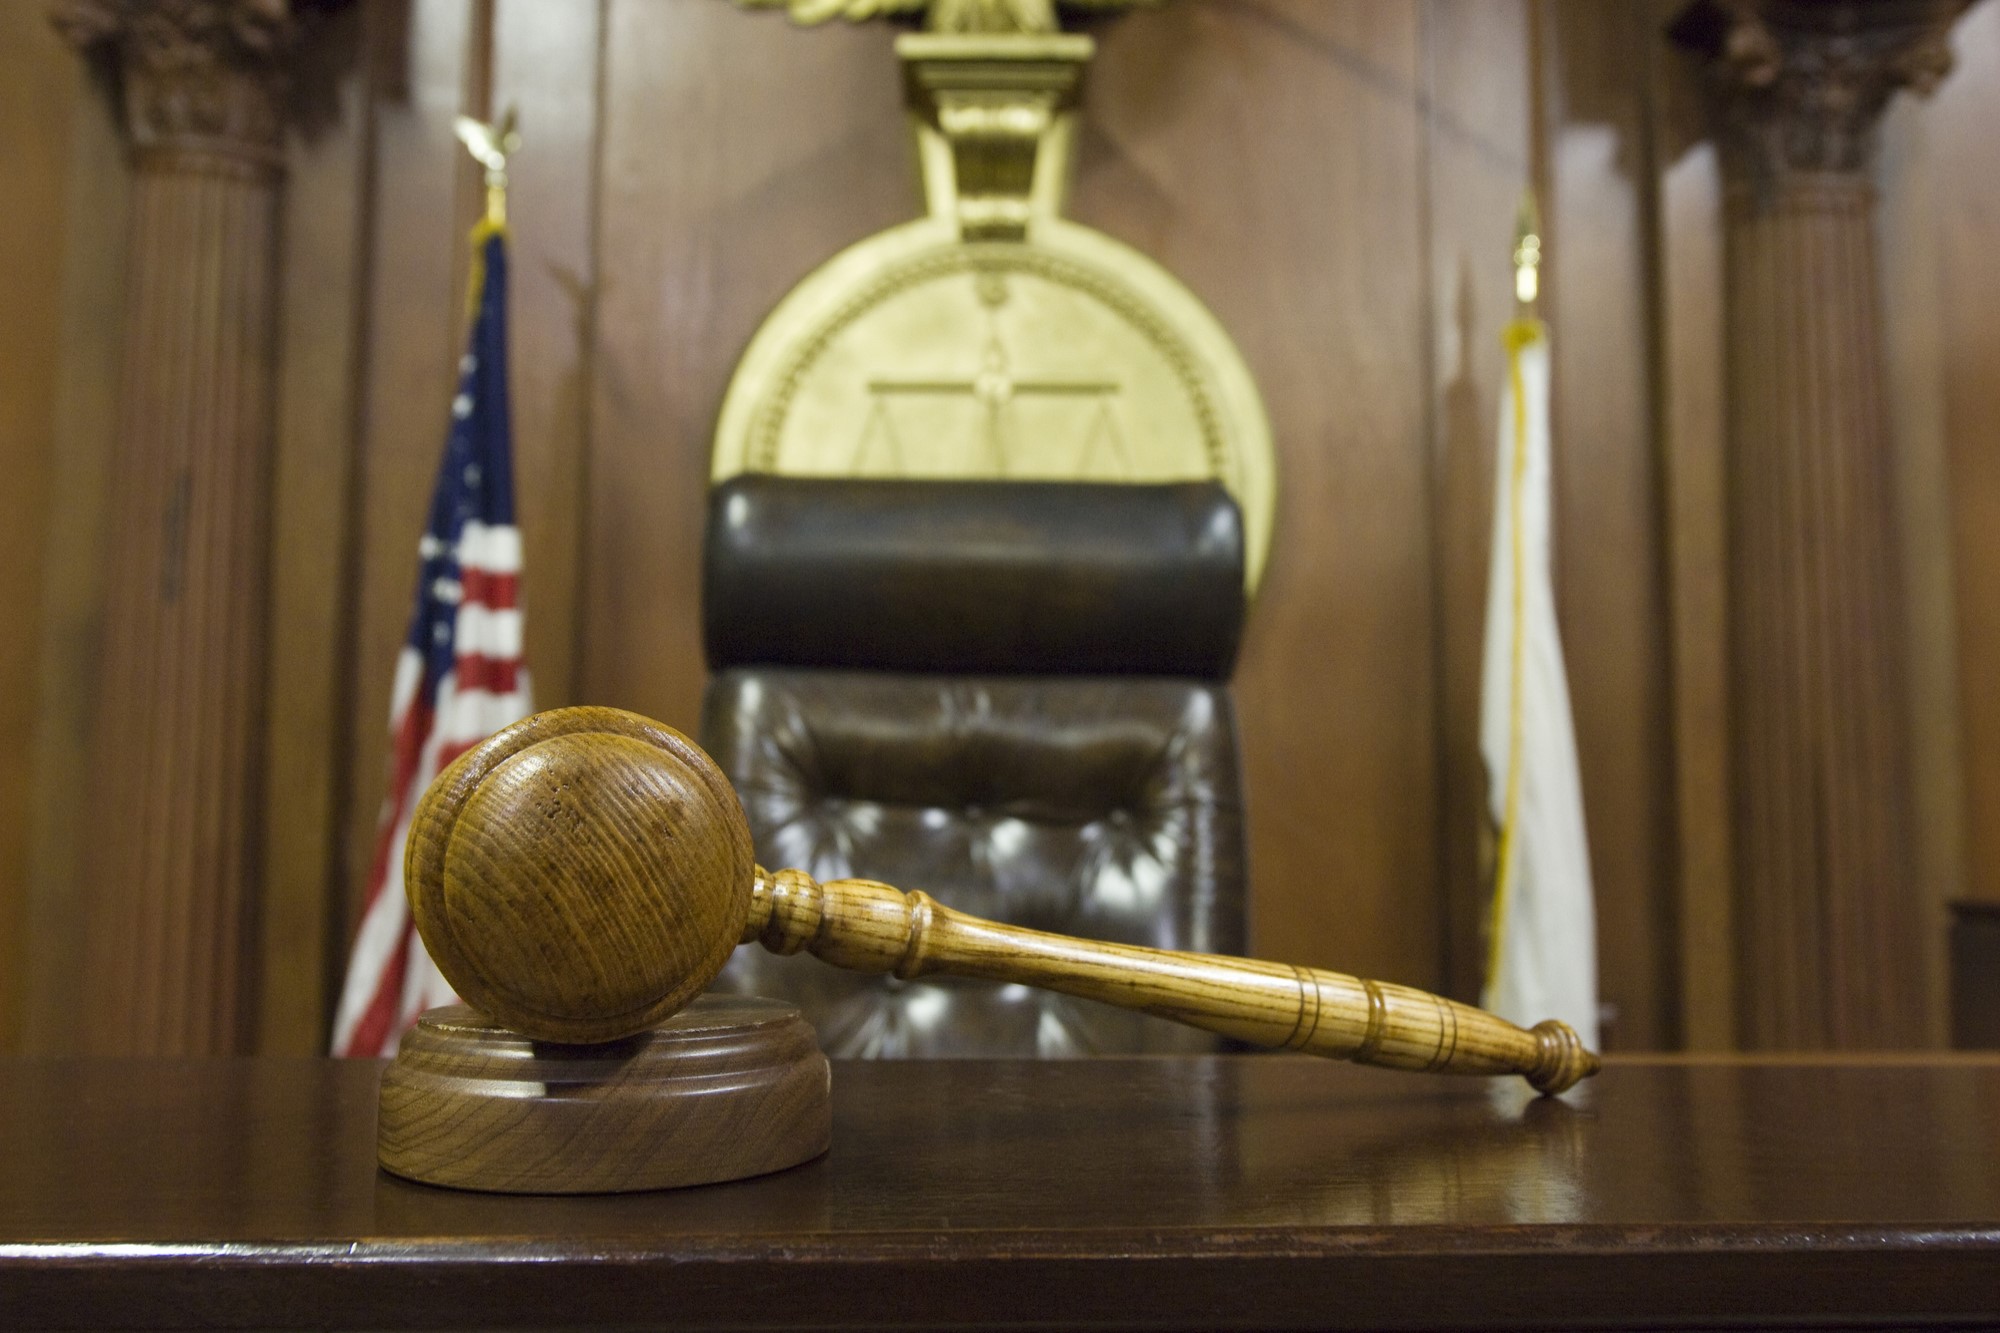 photograph of gavel and judge's seat in courtroom